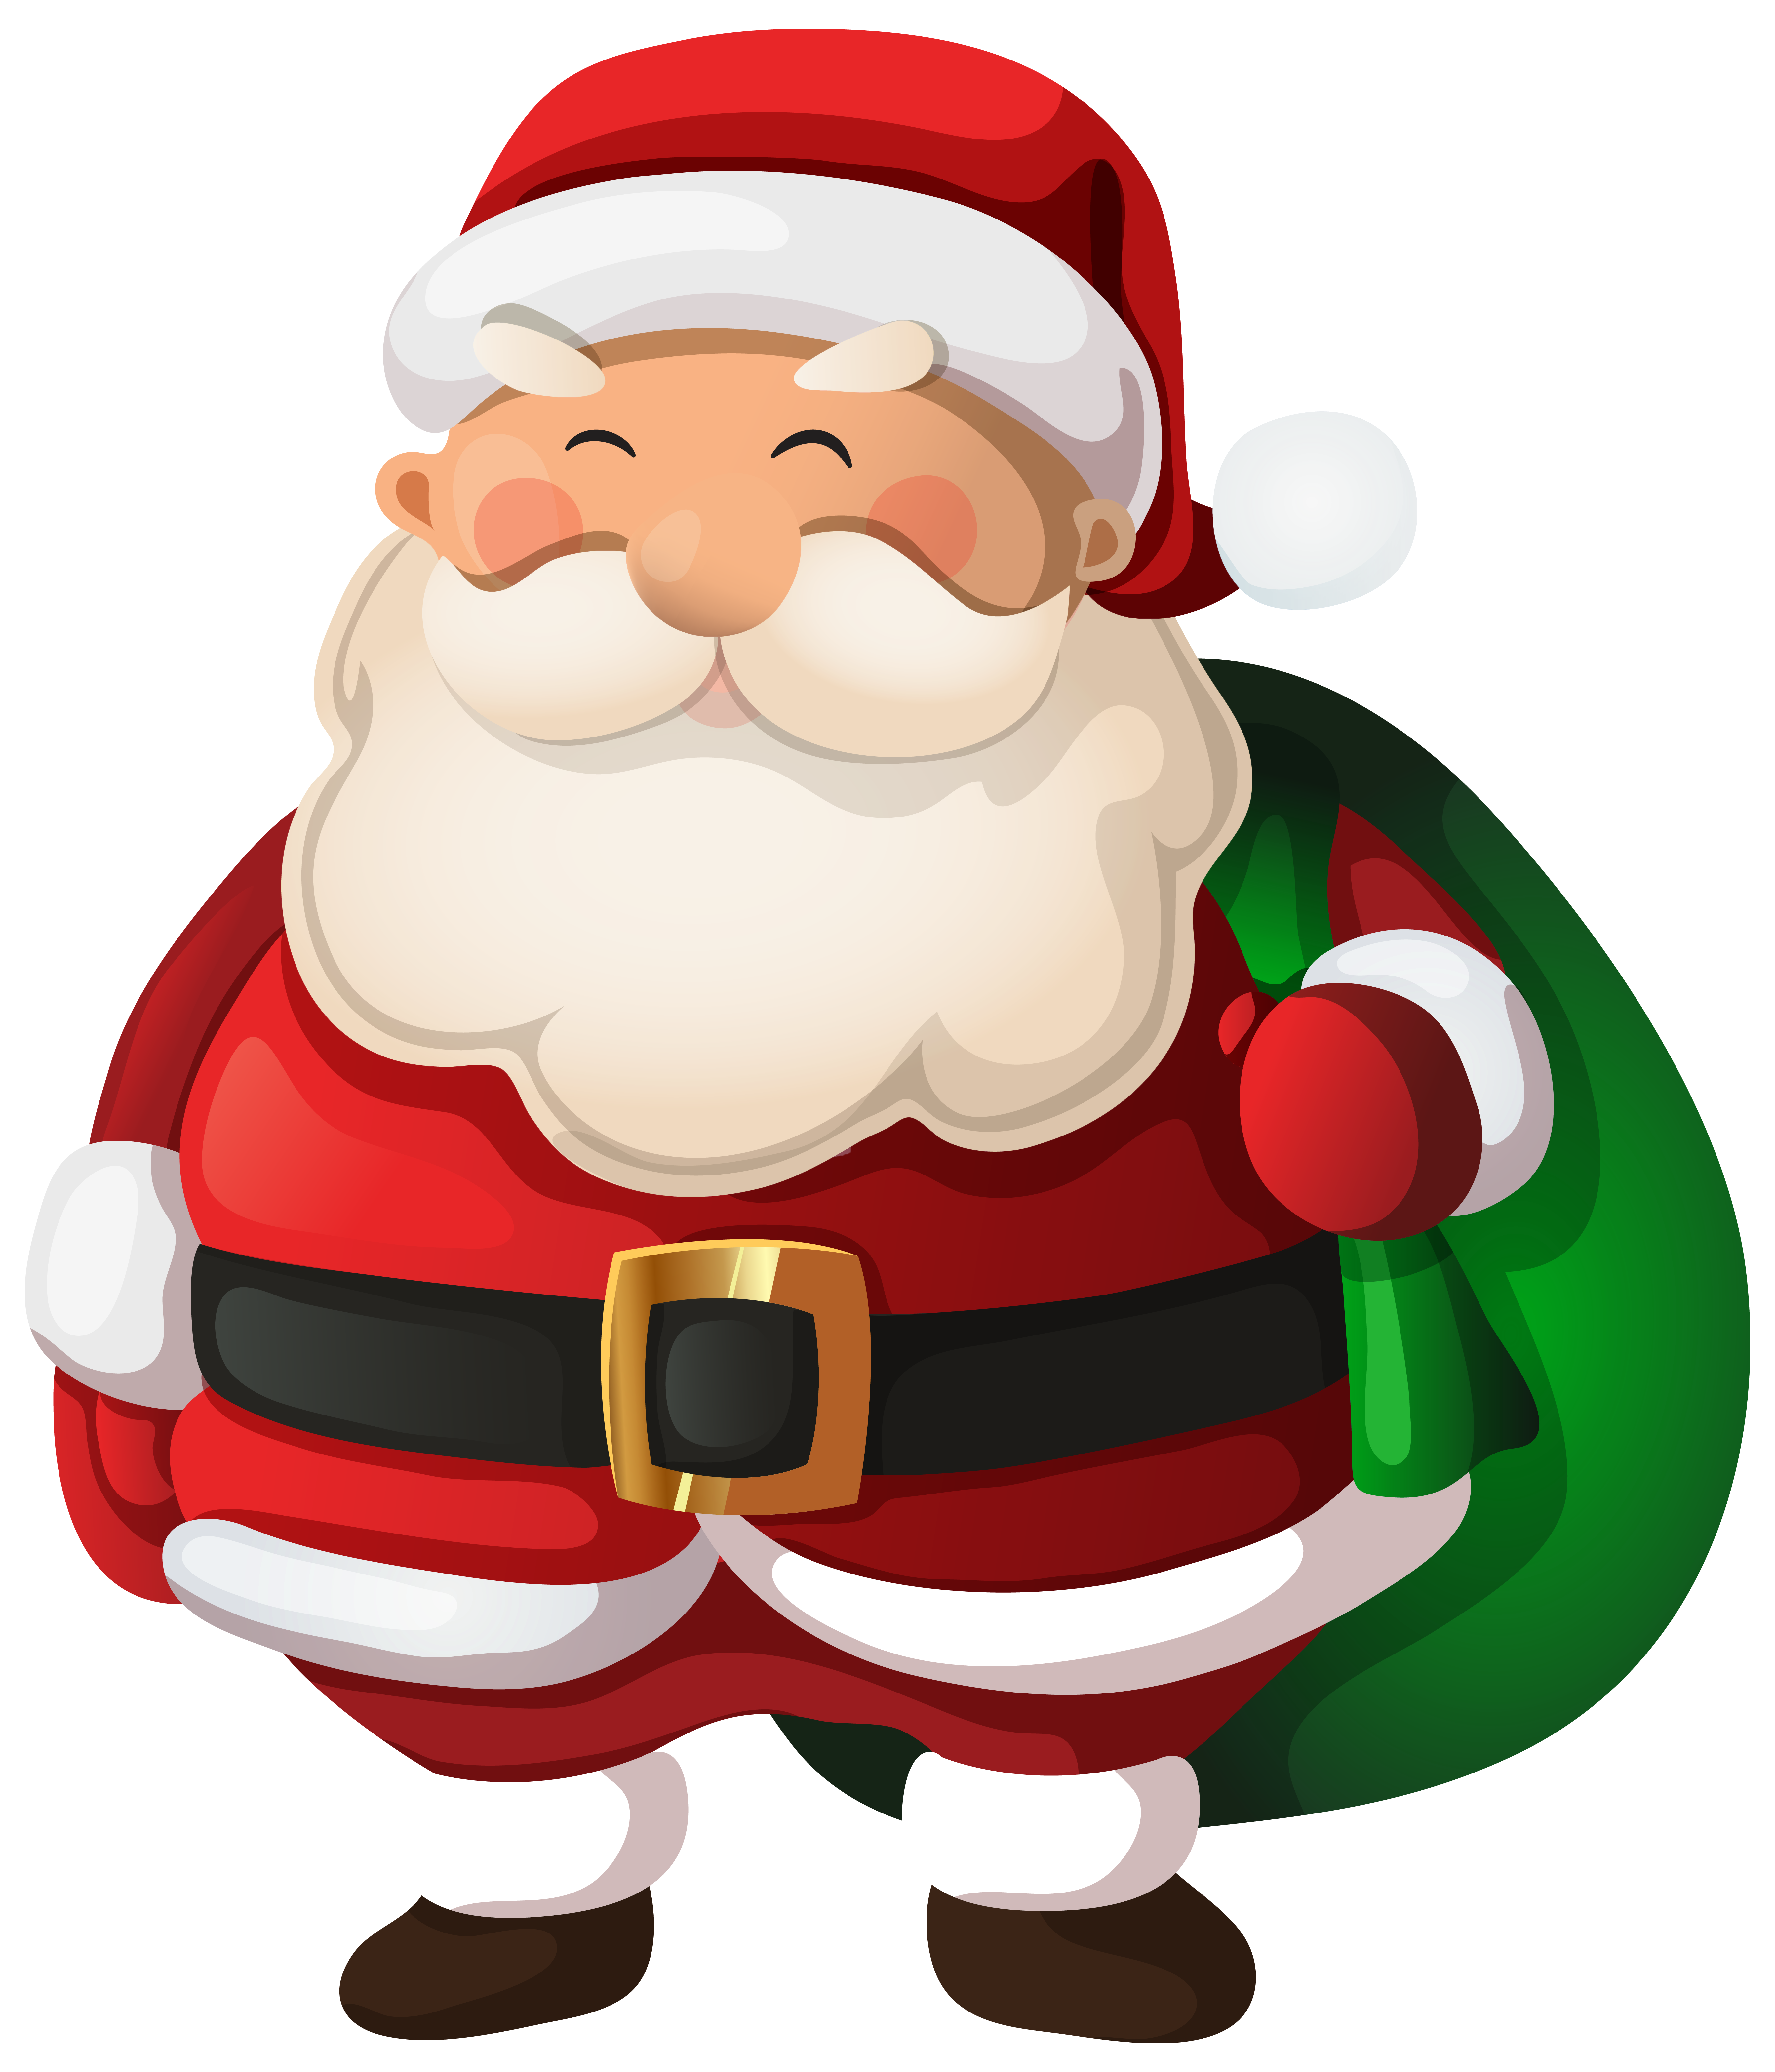 Santa Claus PNG Clip Art Image | Gallery Yopriceville - High ...